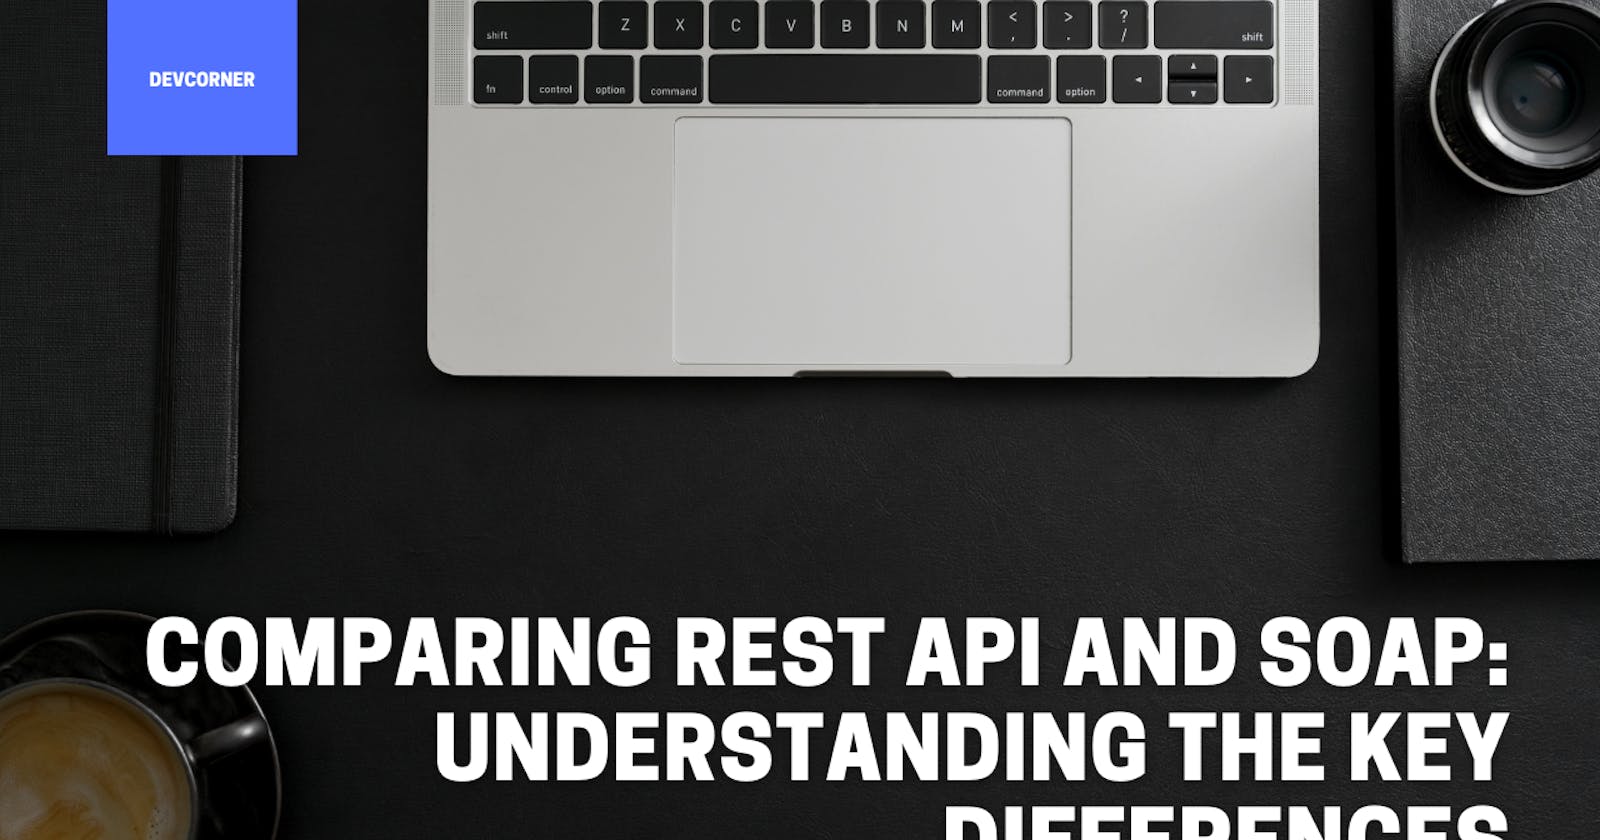 Comparing REST API and SOAP: Understanding the Key Differences